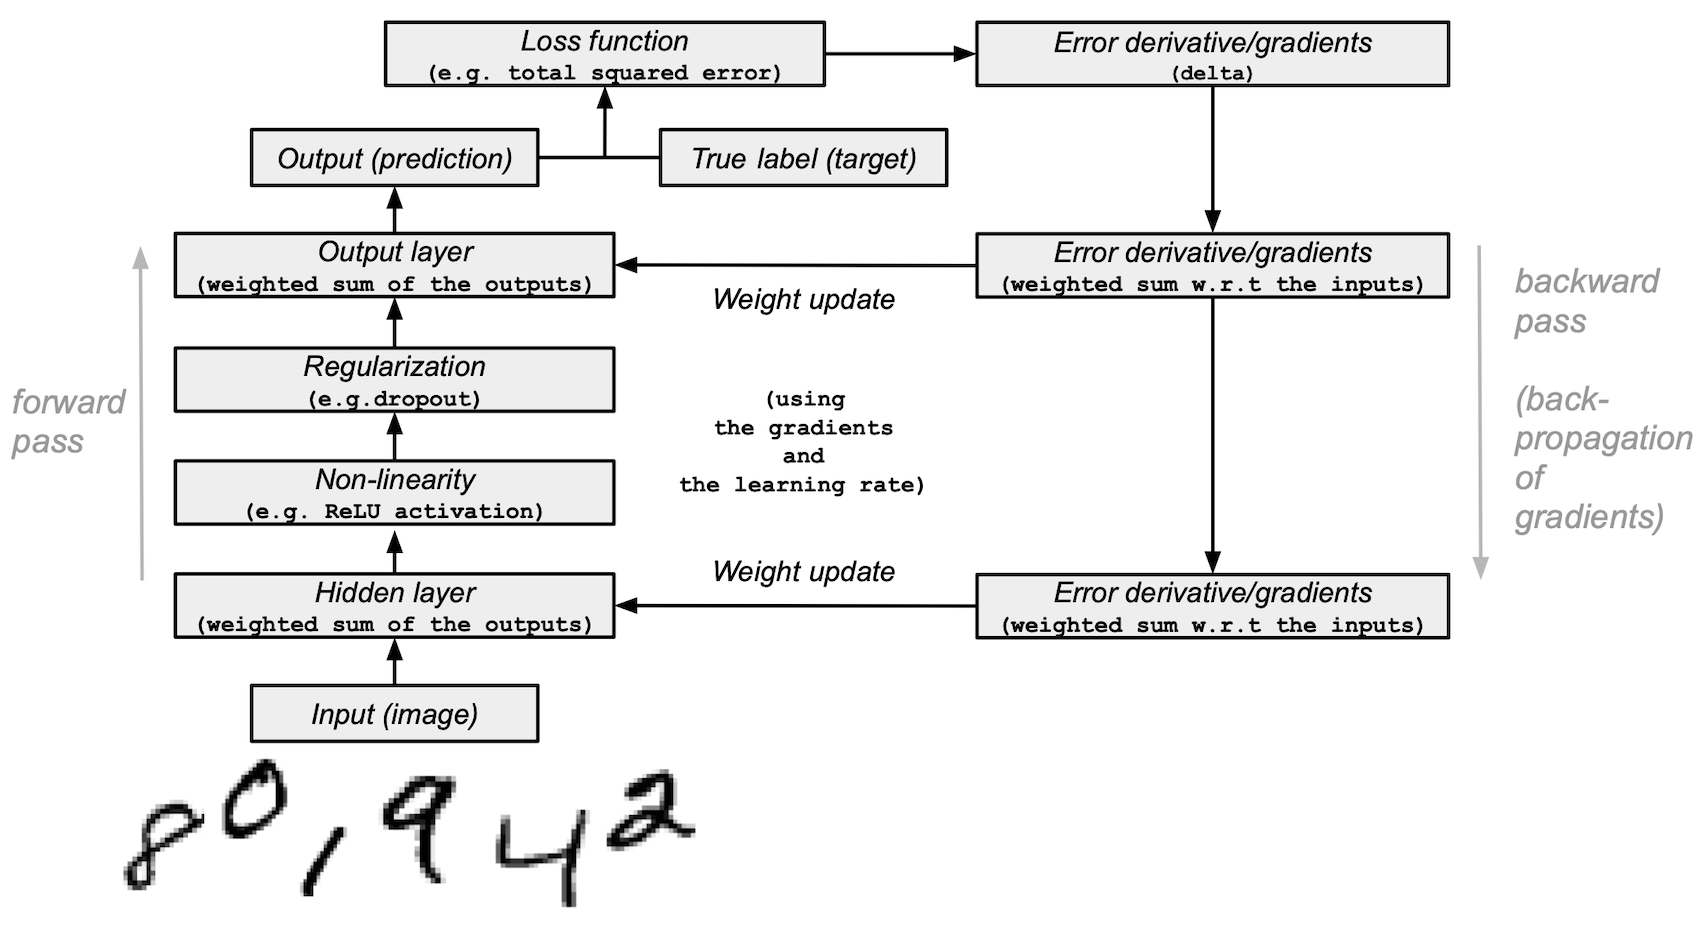 Diagram showing operations detailed in this tutorial (The input imageis passed into a Hidden layer that creates a weighted sum of outputs.The weighted sum is passed to the Non-linearity, then regularization andinto the output layer. The output layer creates a prediction which canthen be compared to existing data. The errors are used to calculate theloss function and update weights in the hidden layer and outputlayer.)